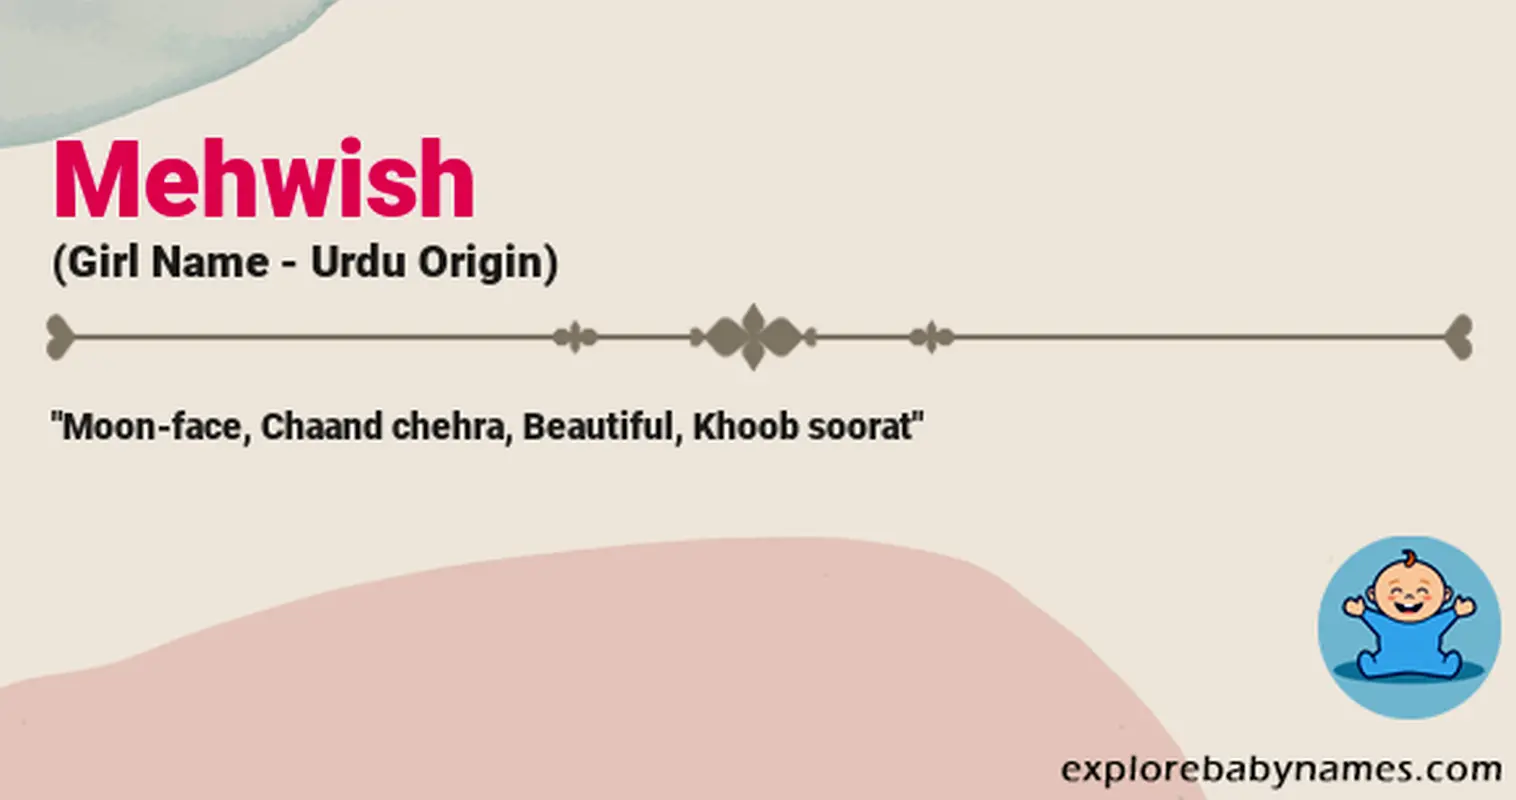 Meaning of Mehwish